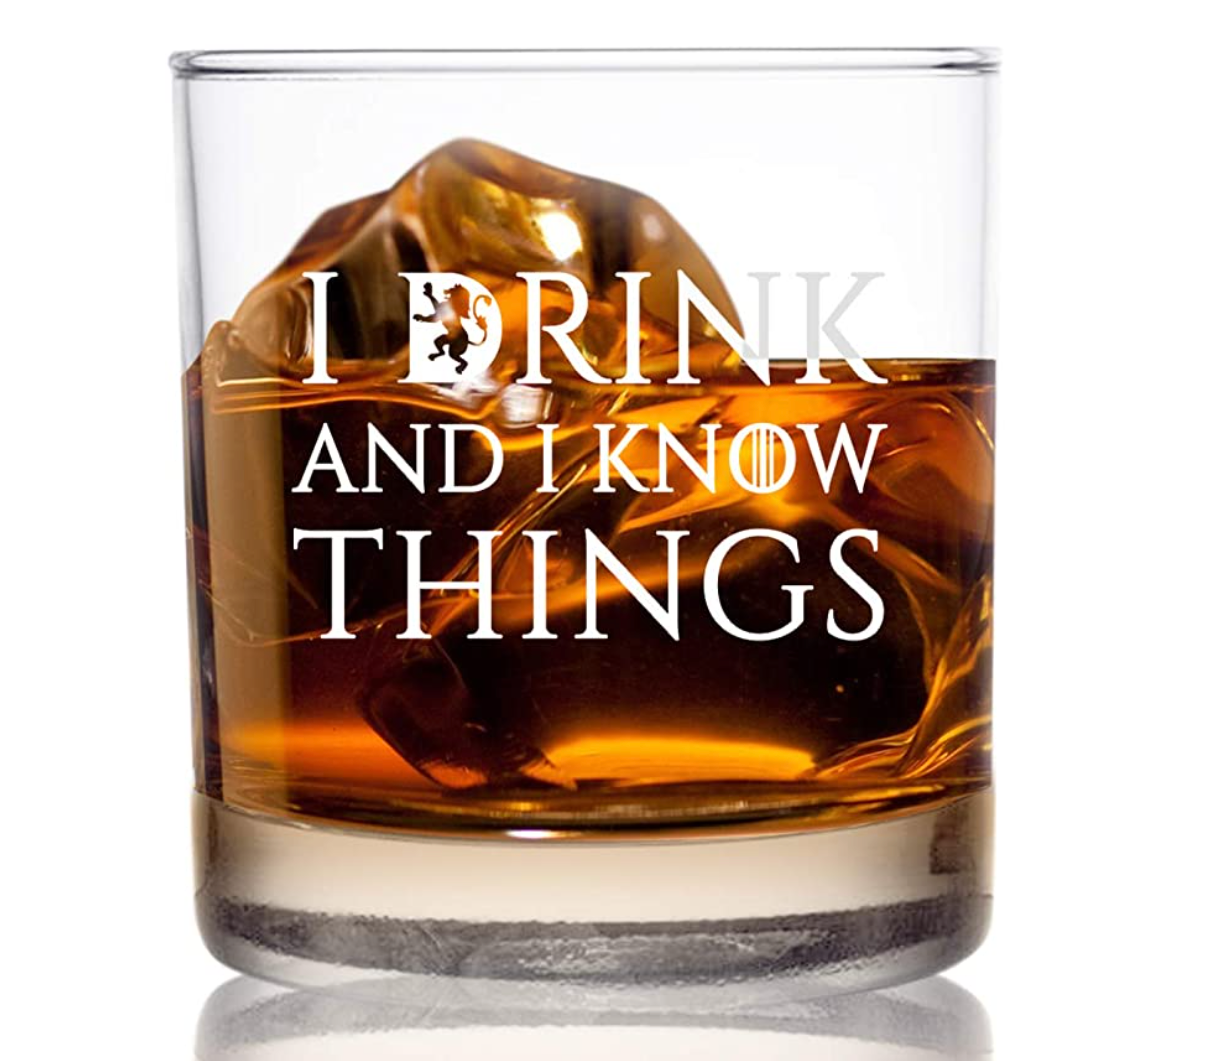 Verre à whisky "I Drink and I Know Things"